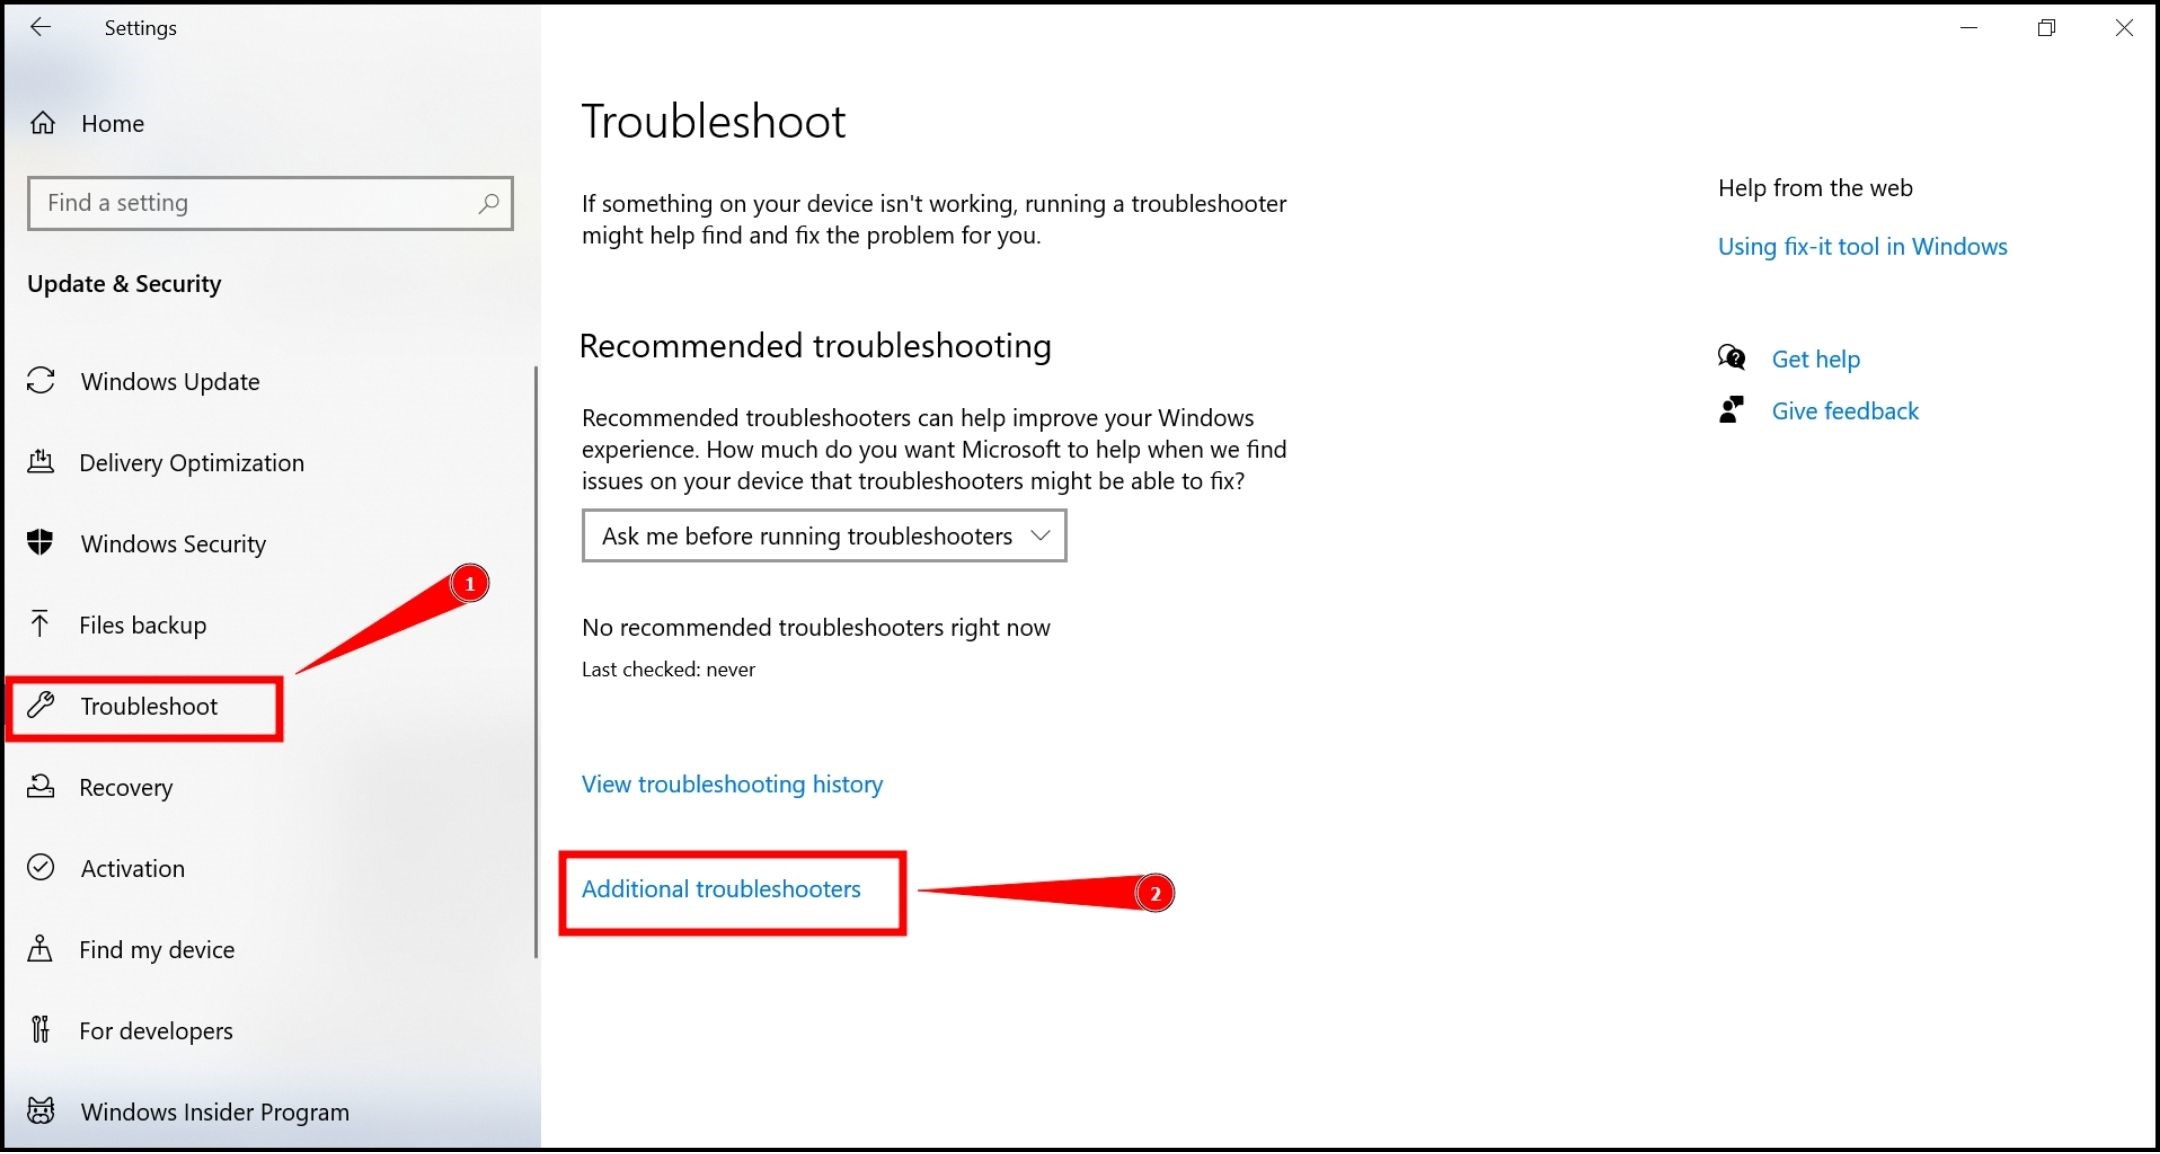 Click on Troubleshoot and Additional troubleshooters